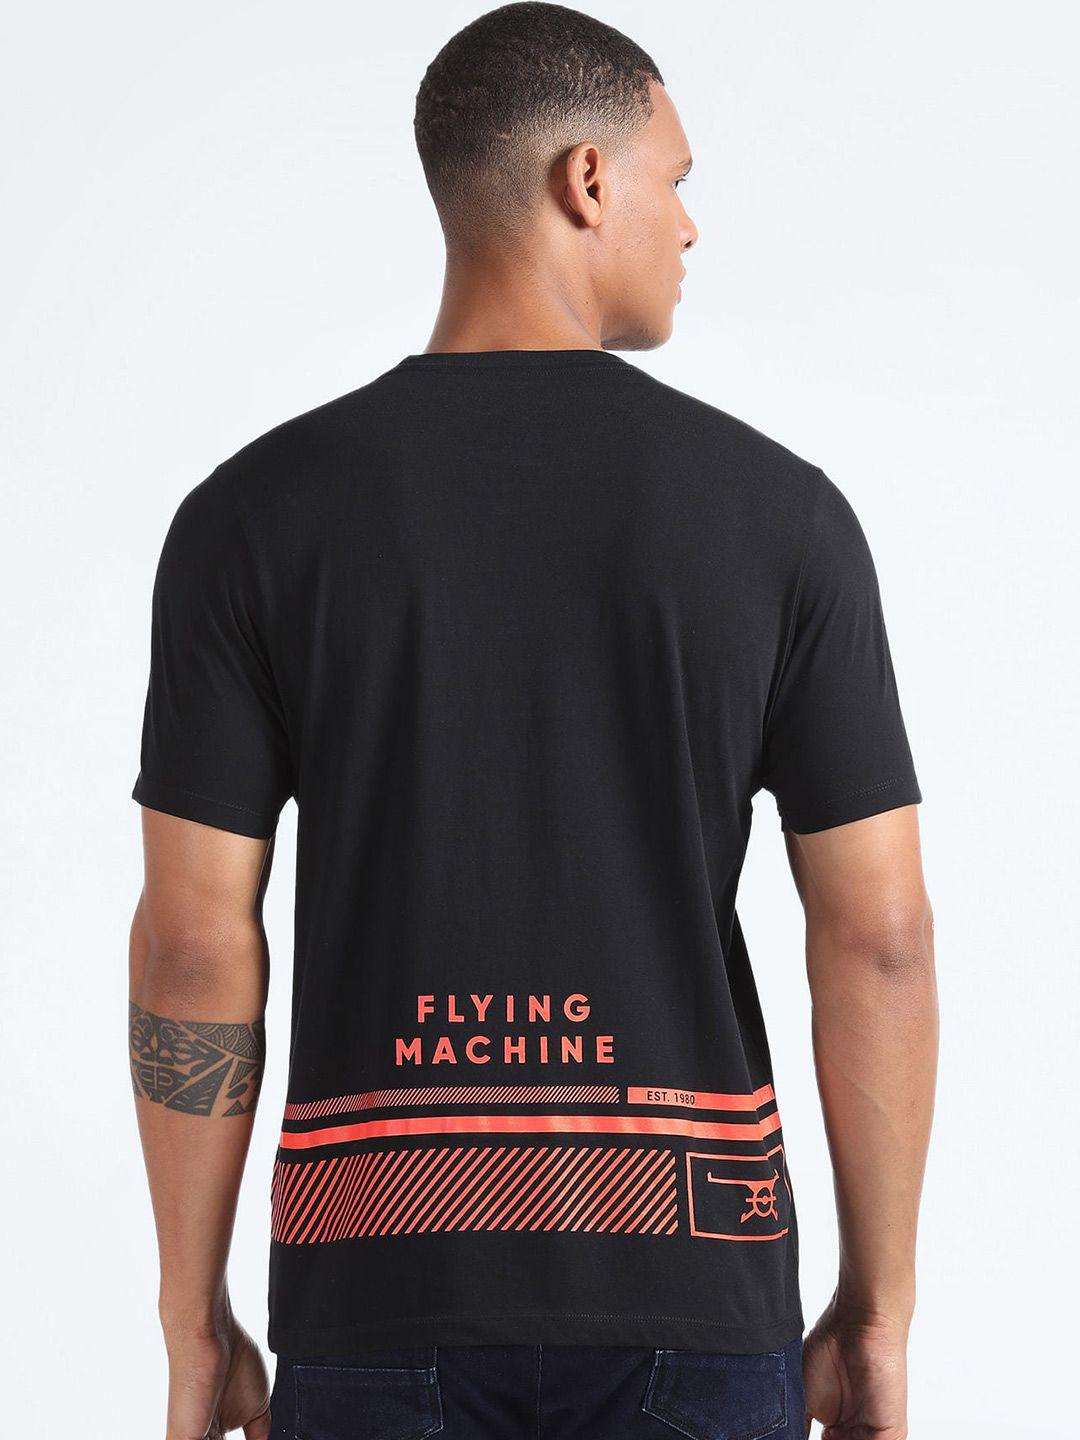 flying machine typography printed cotton t-shirt